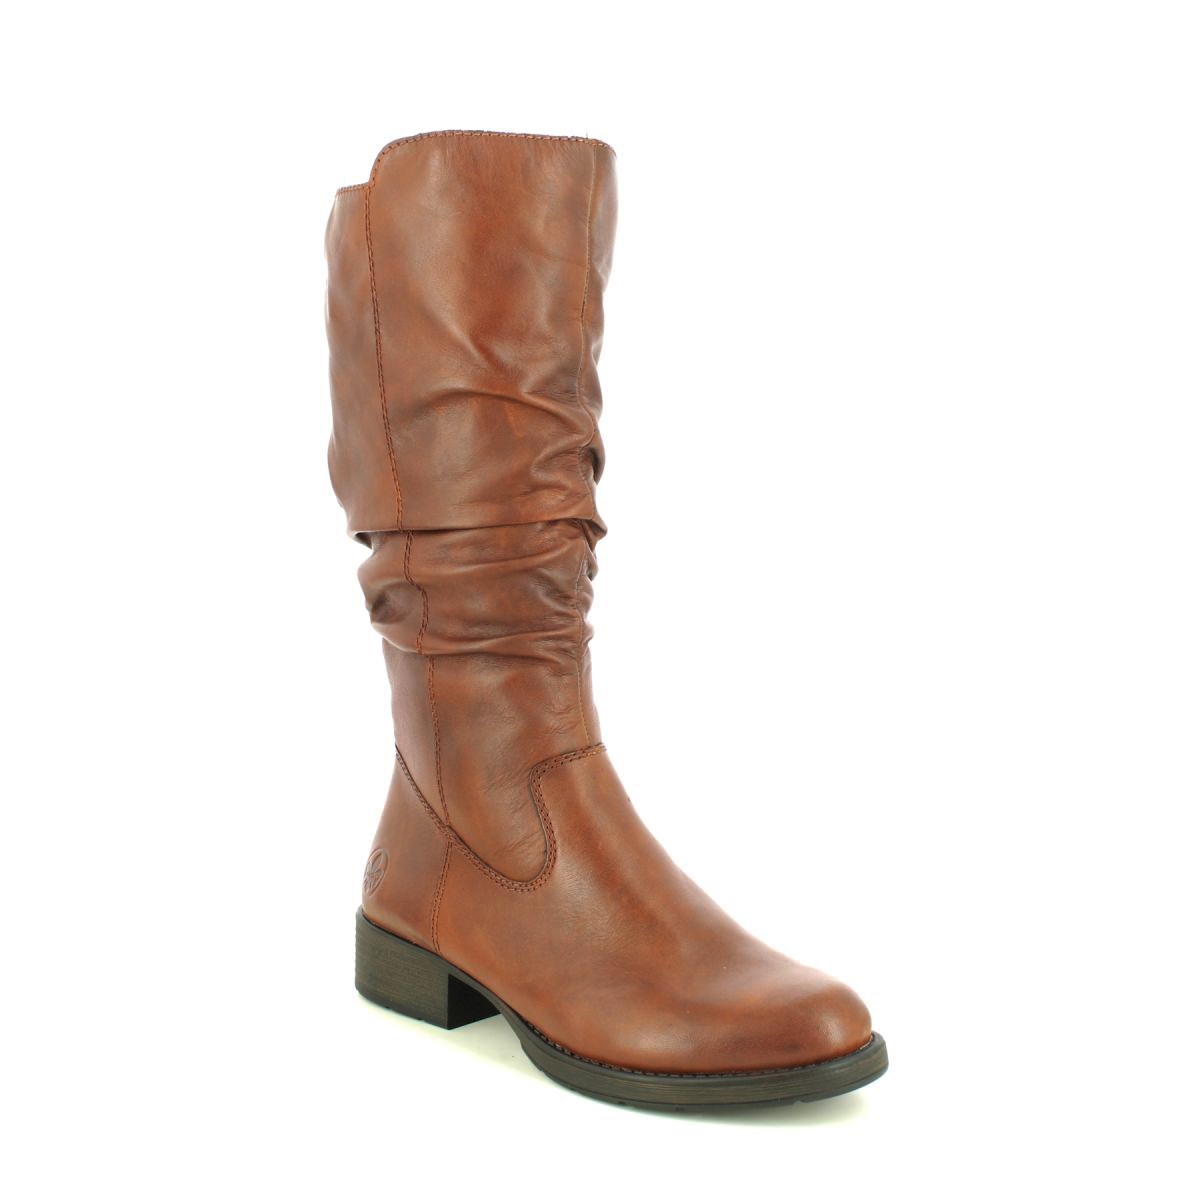 Rieker Z9563-22 Brown leather Womens Mid Calf Boots in a Plain Leather in Size 39